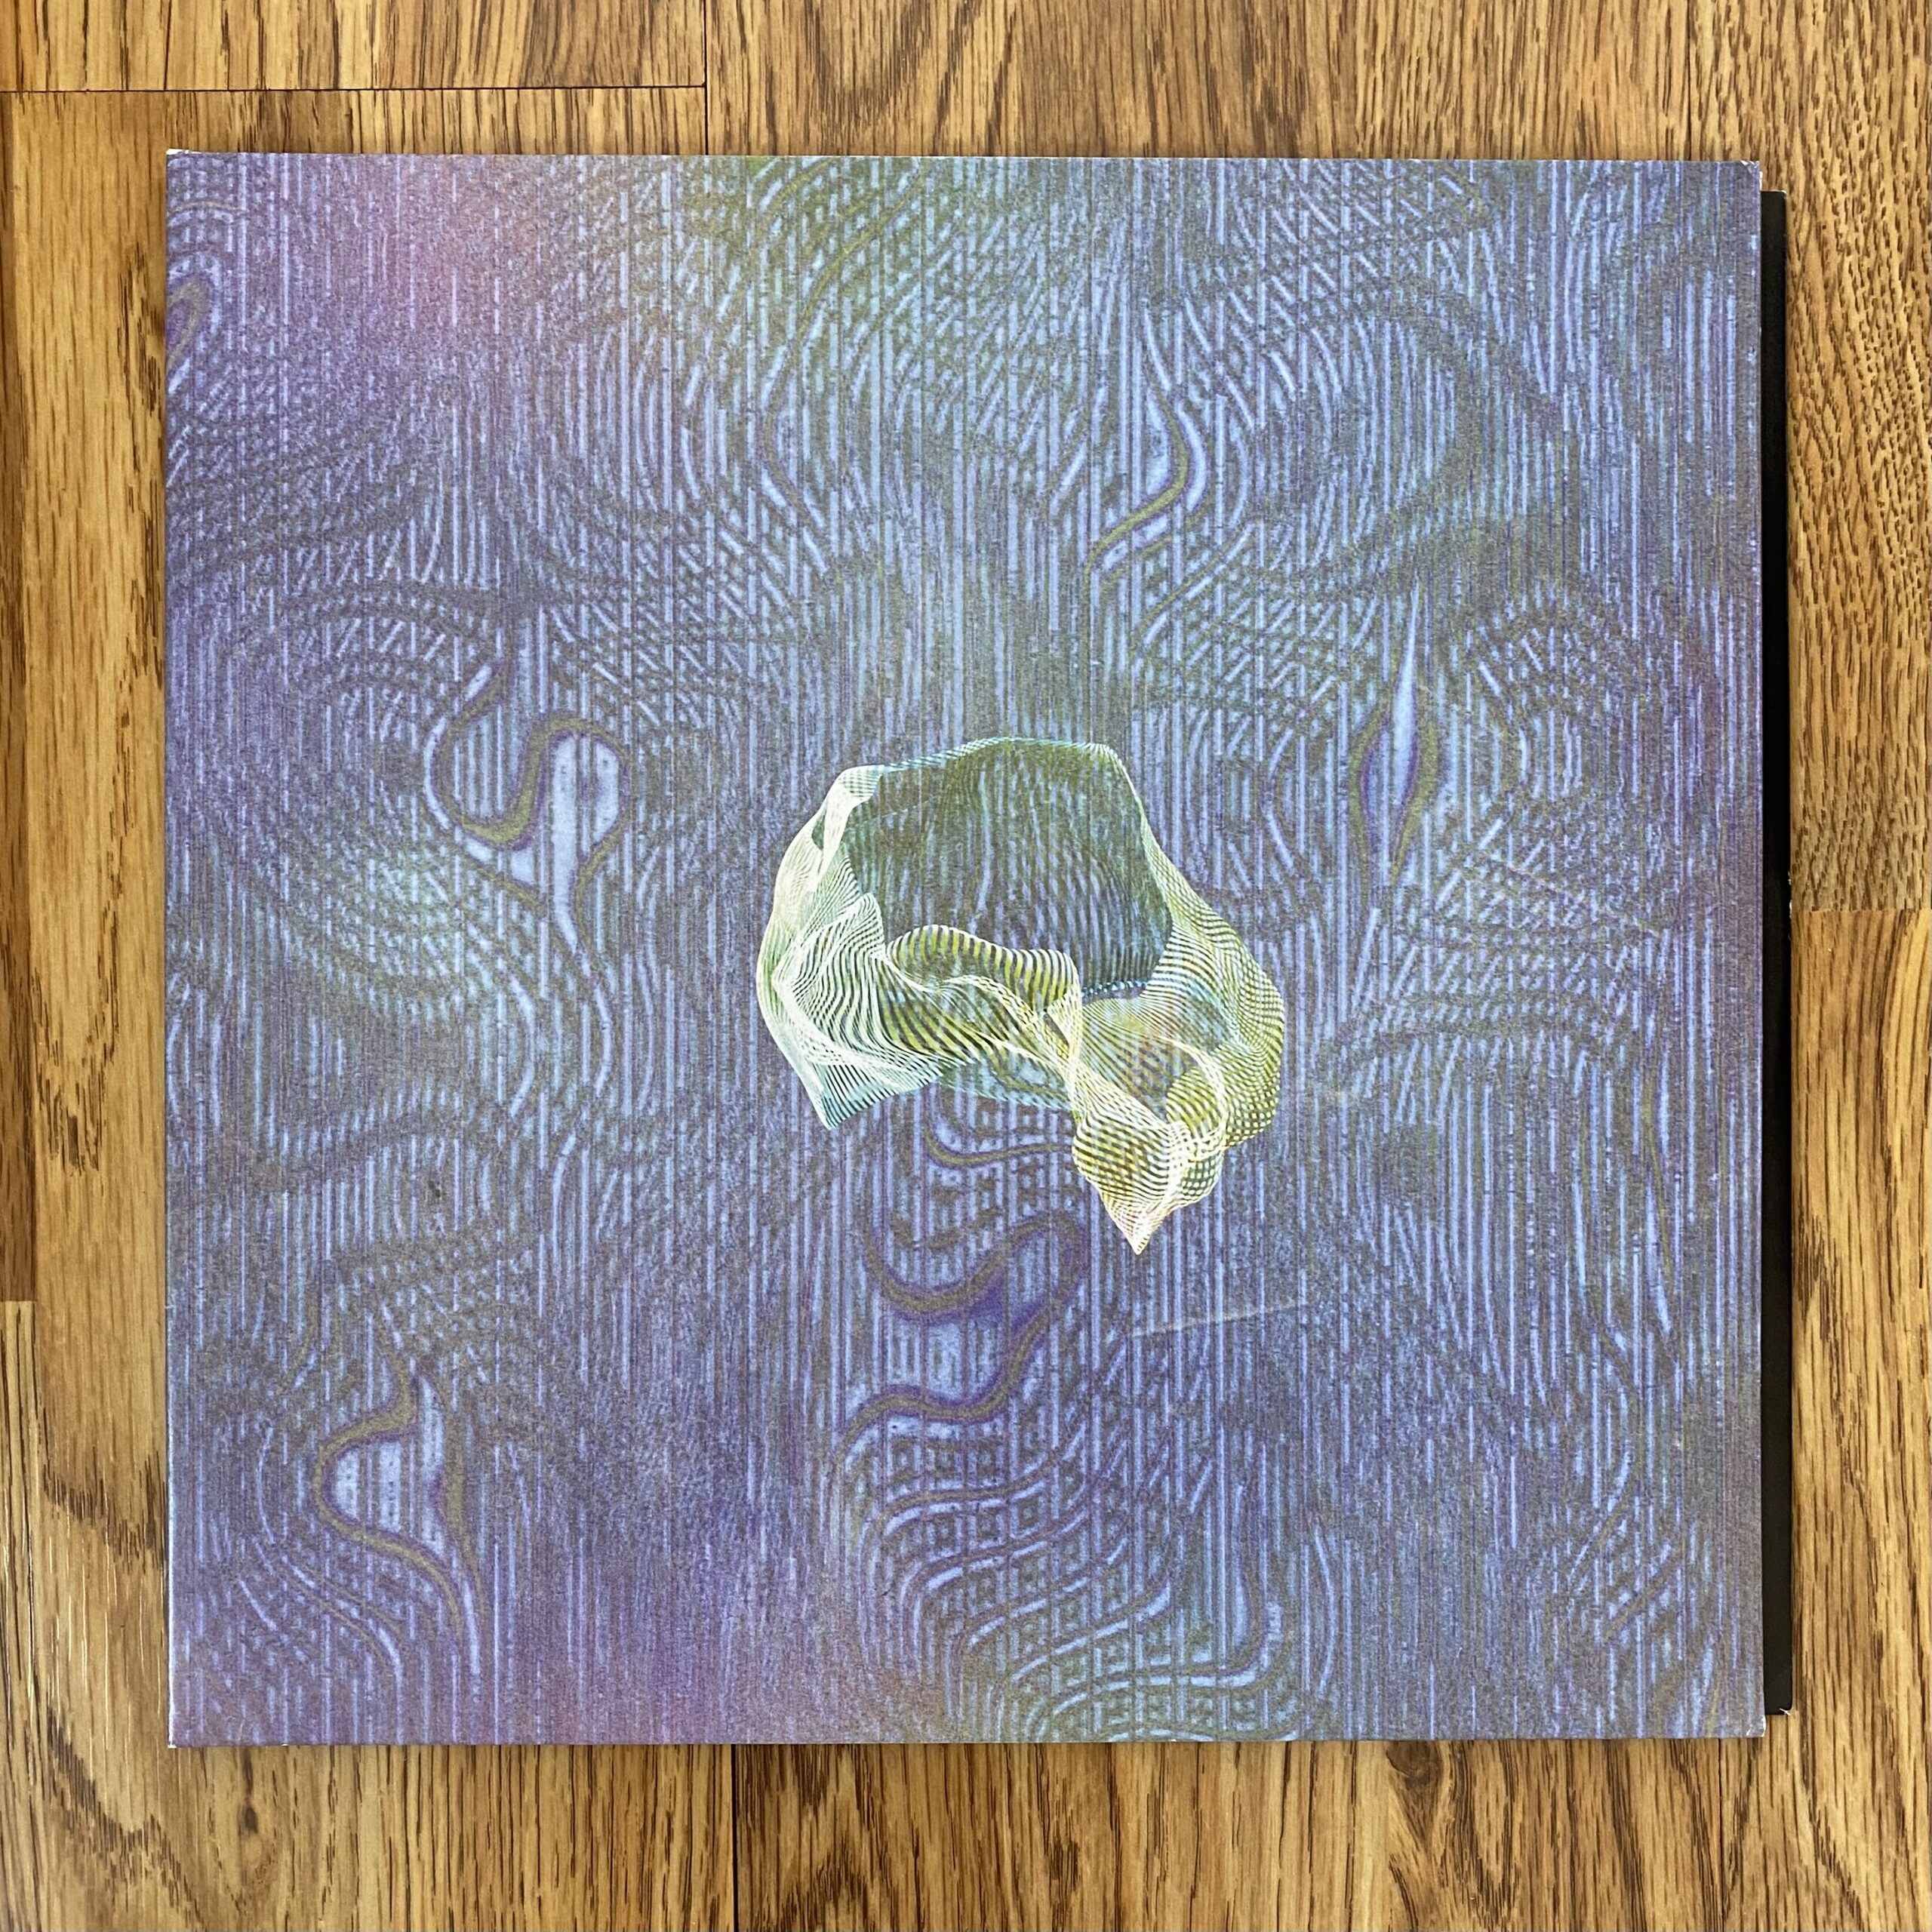 Image Description:A photo of the front cover of "Sudden Anatomy" by Ice Cream Cathedral. The background is an abstract blend of purples, pinks, and blues, and there is an abstract, wavy cream colored drawing at the center of the cover.